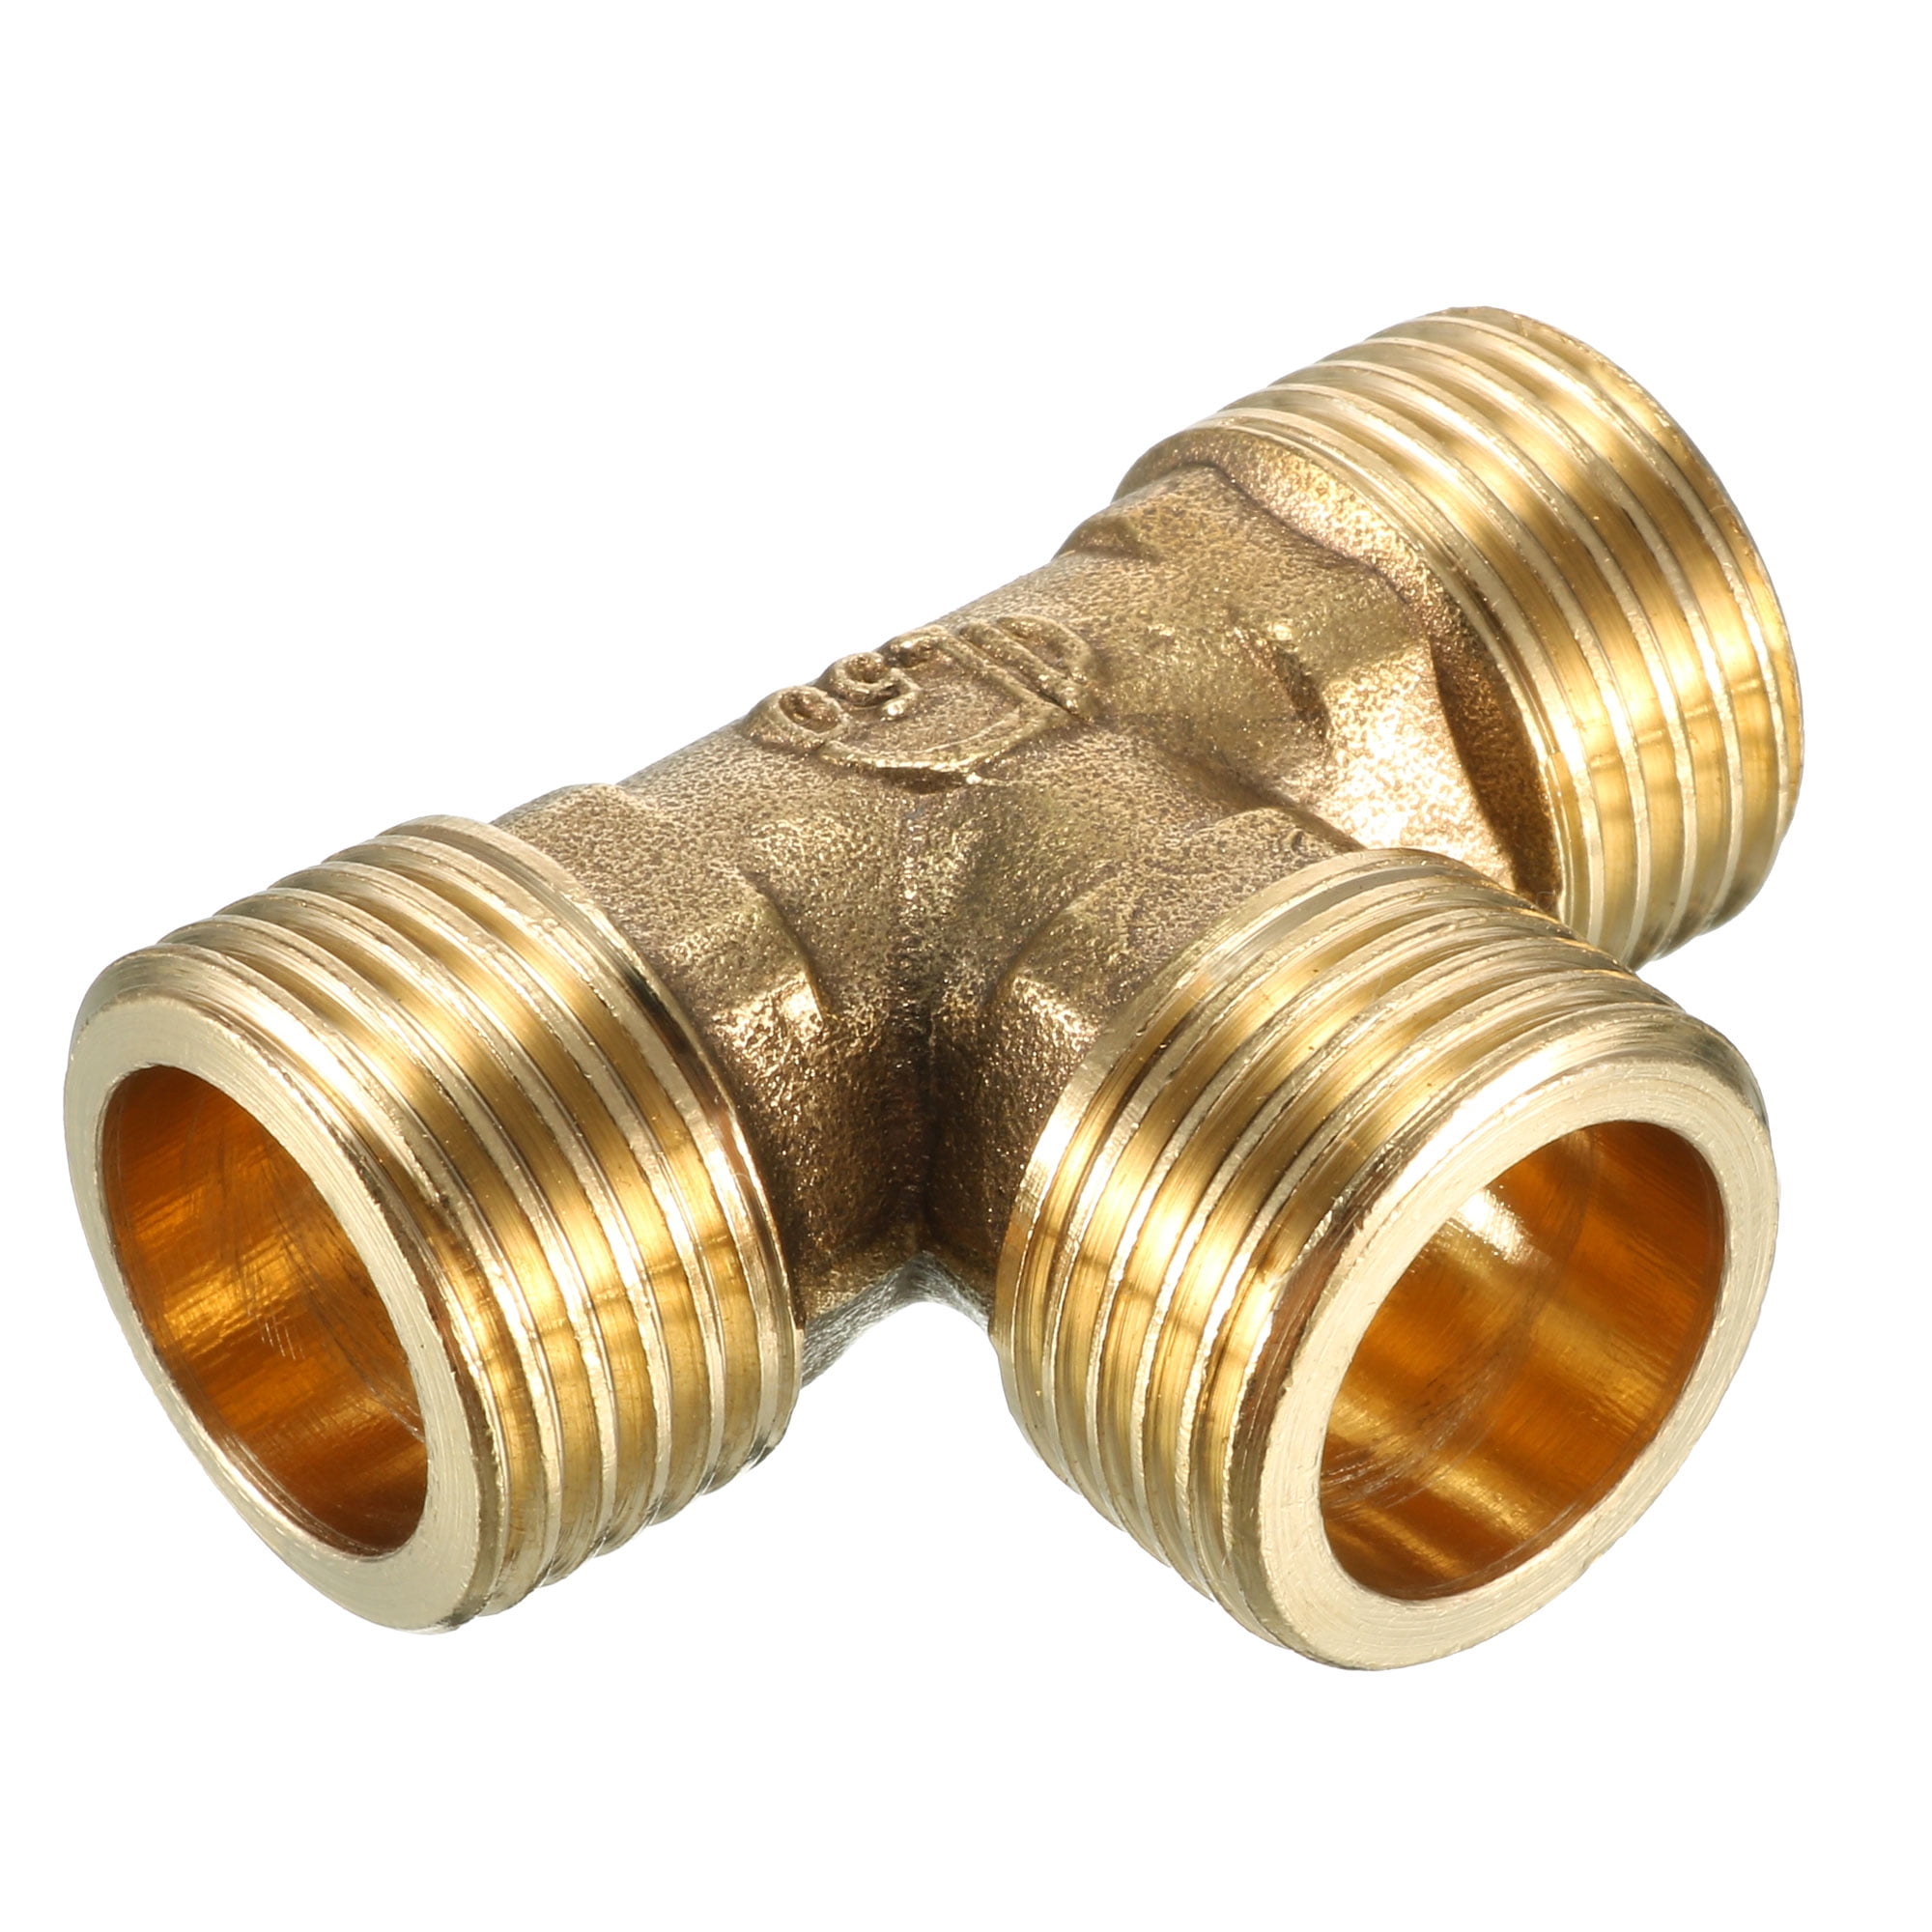 3 Way T-Shaped BSP Equal Male Thread Brass Tee Connector Pipe Fittings Adapter 